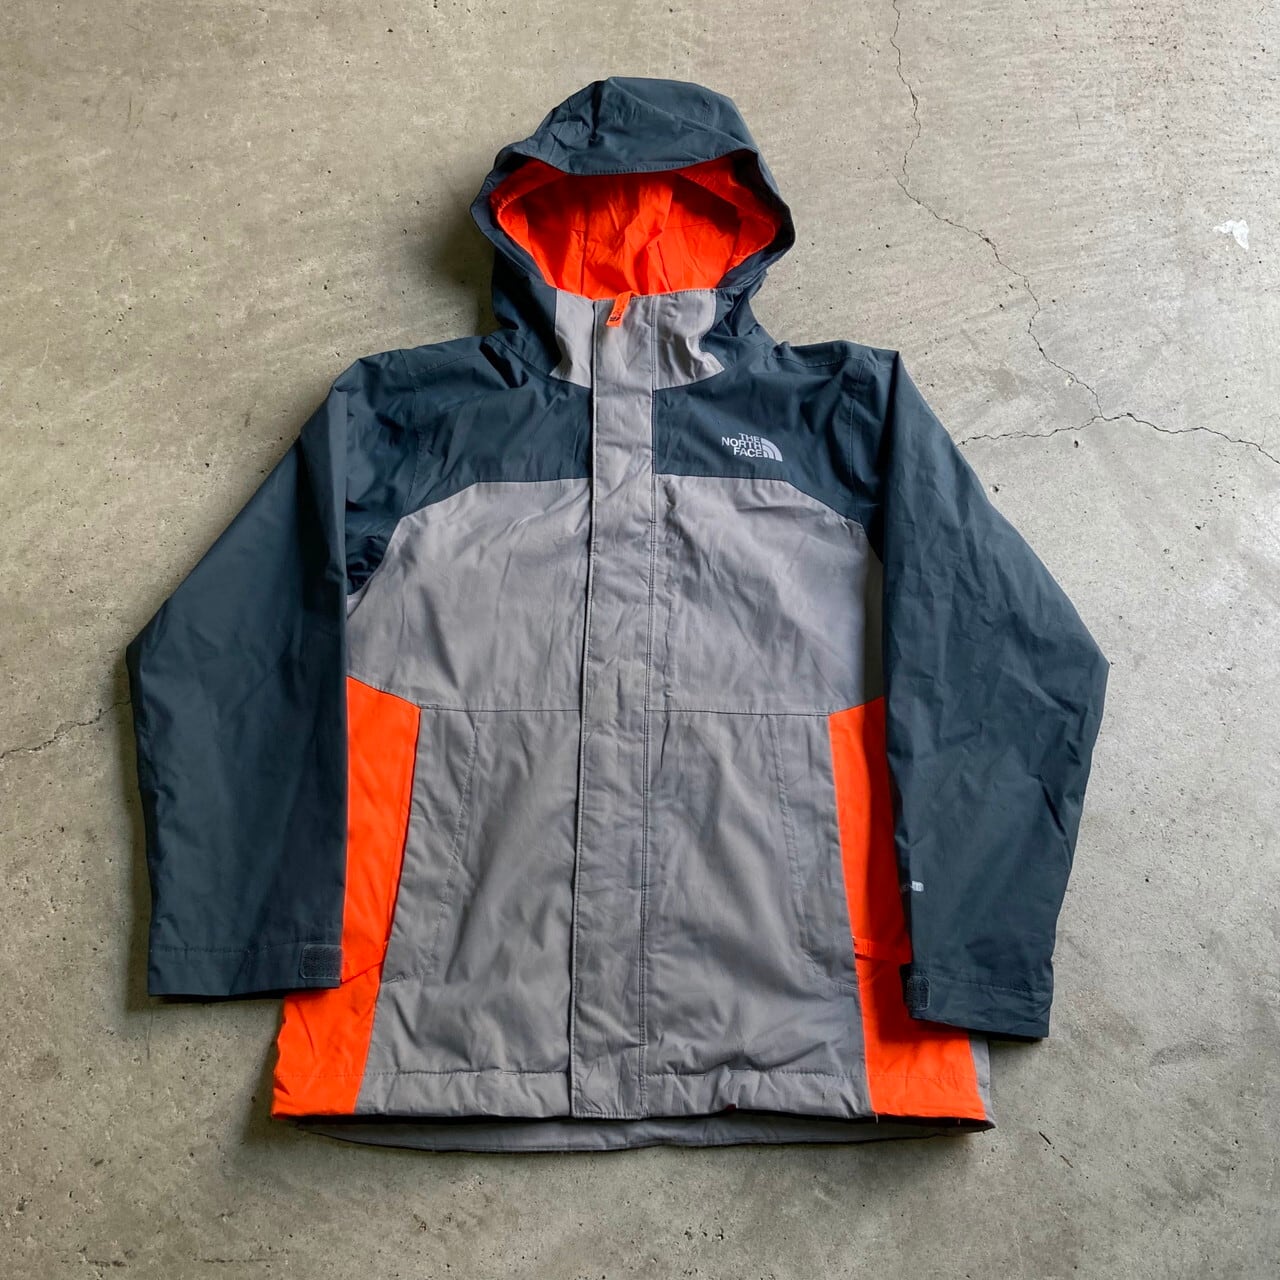 THE NORTH FACE  ザノースフェイス　140㎝　キッズ　雨具　カッパ